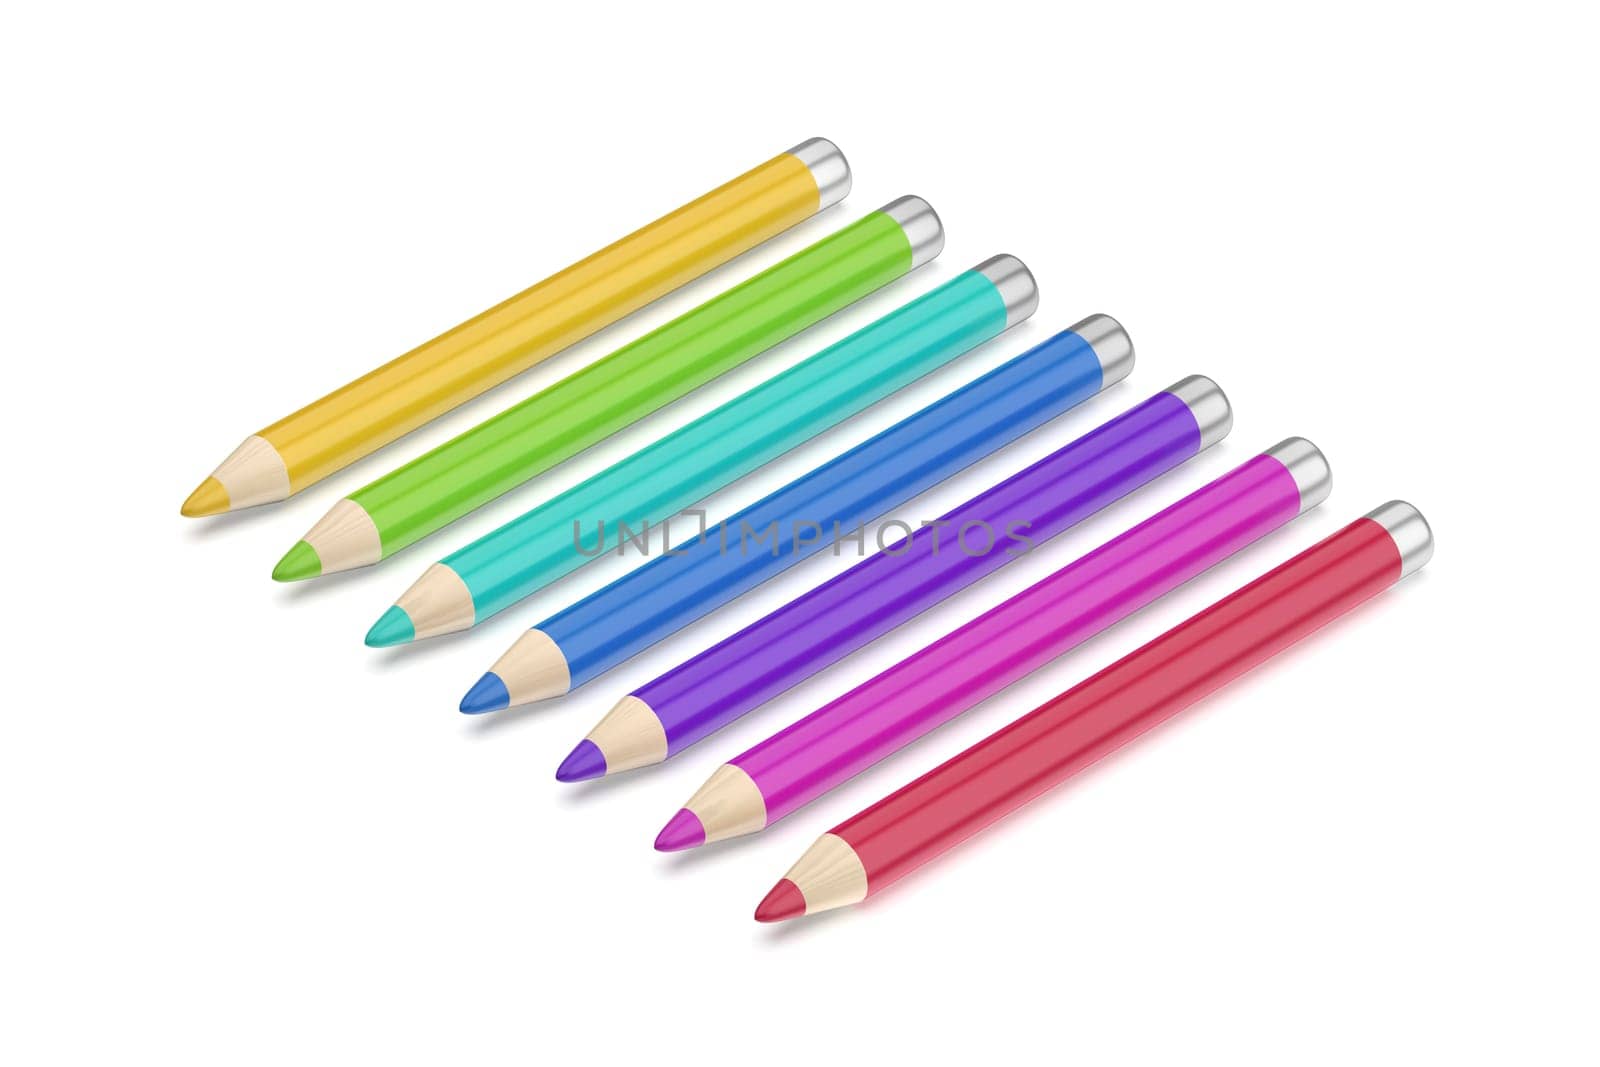 Row with colorful eye pencils by magraphics